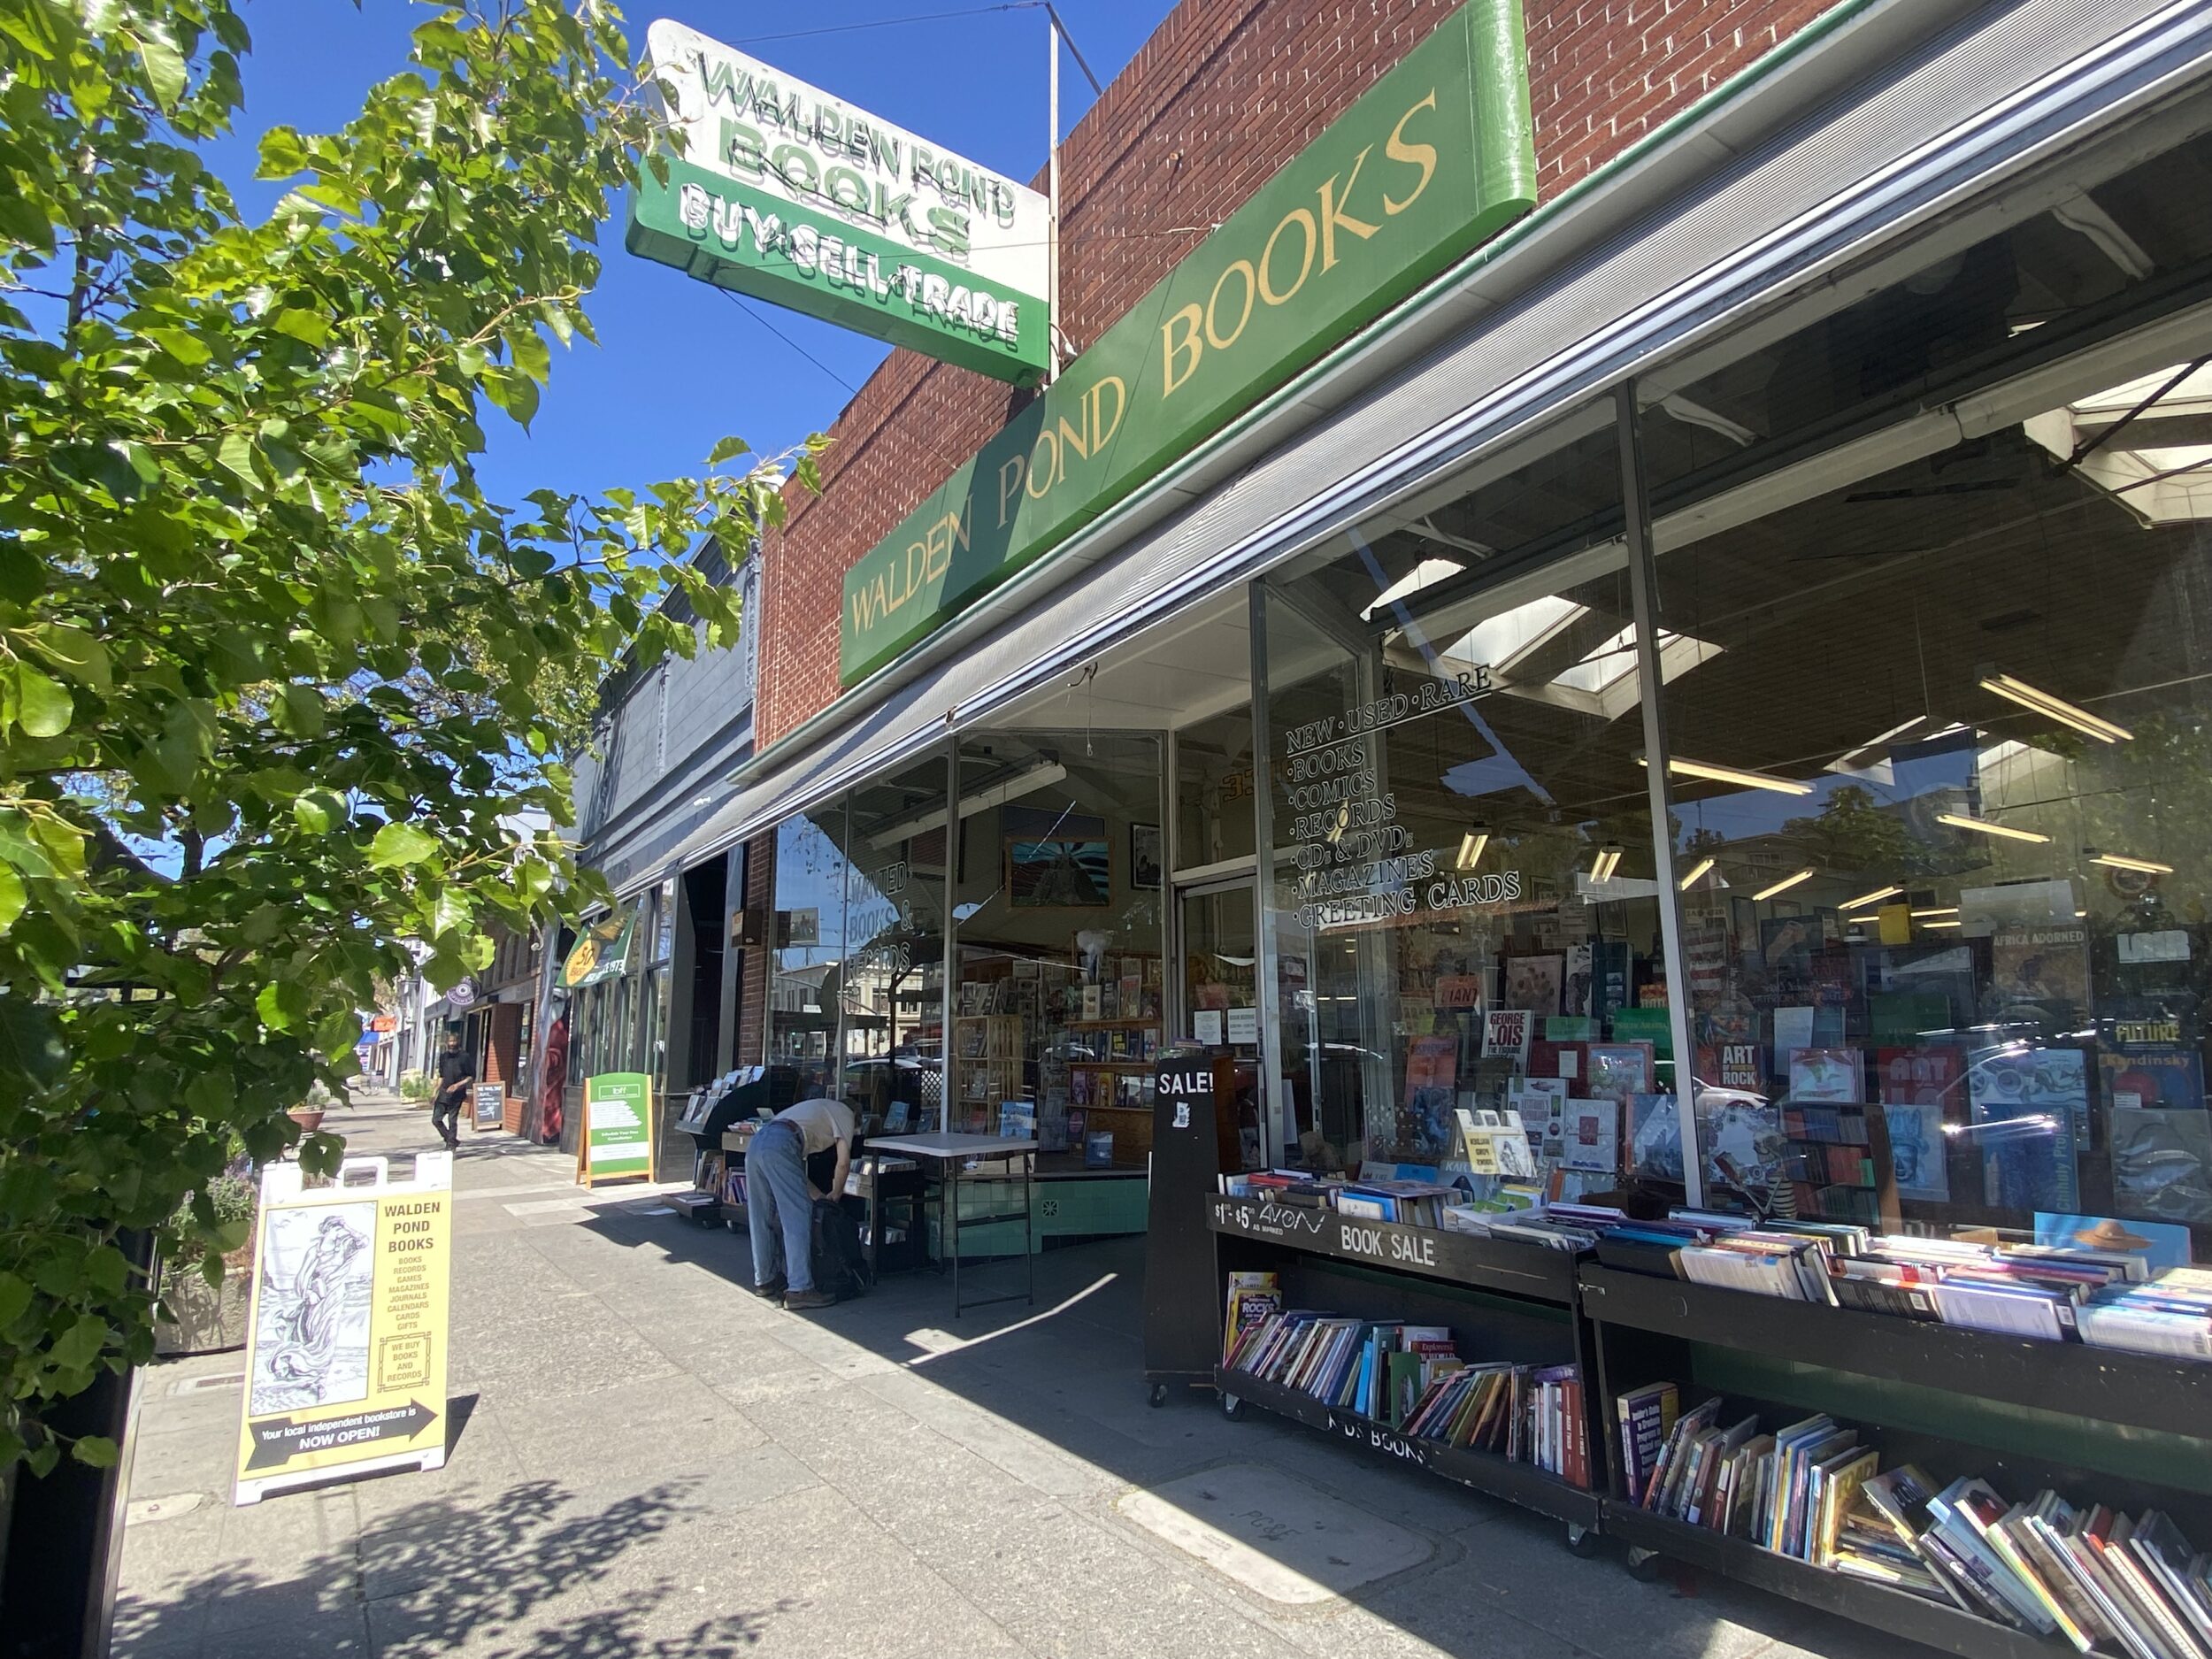 A building with an awning that says Walden Pond Books with tables stacked with books outside. 